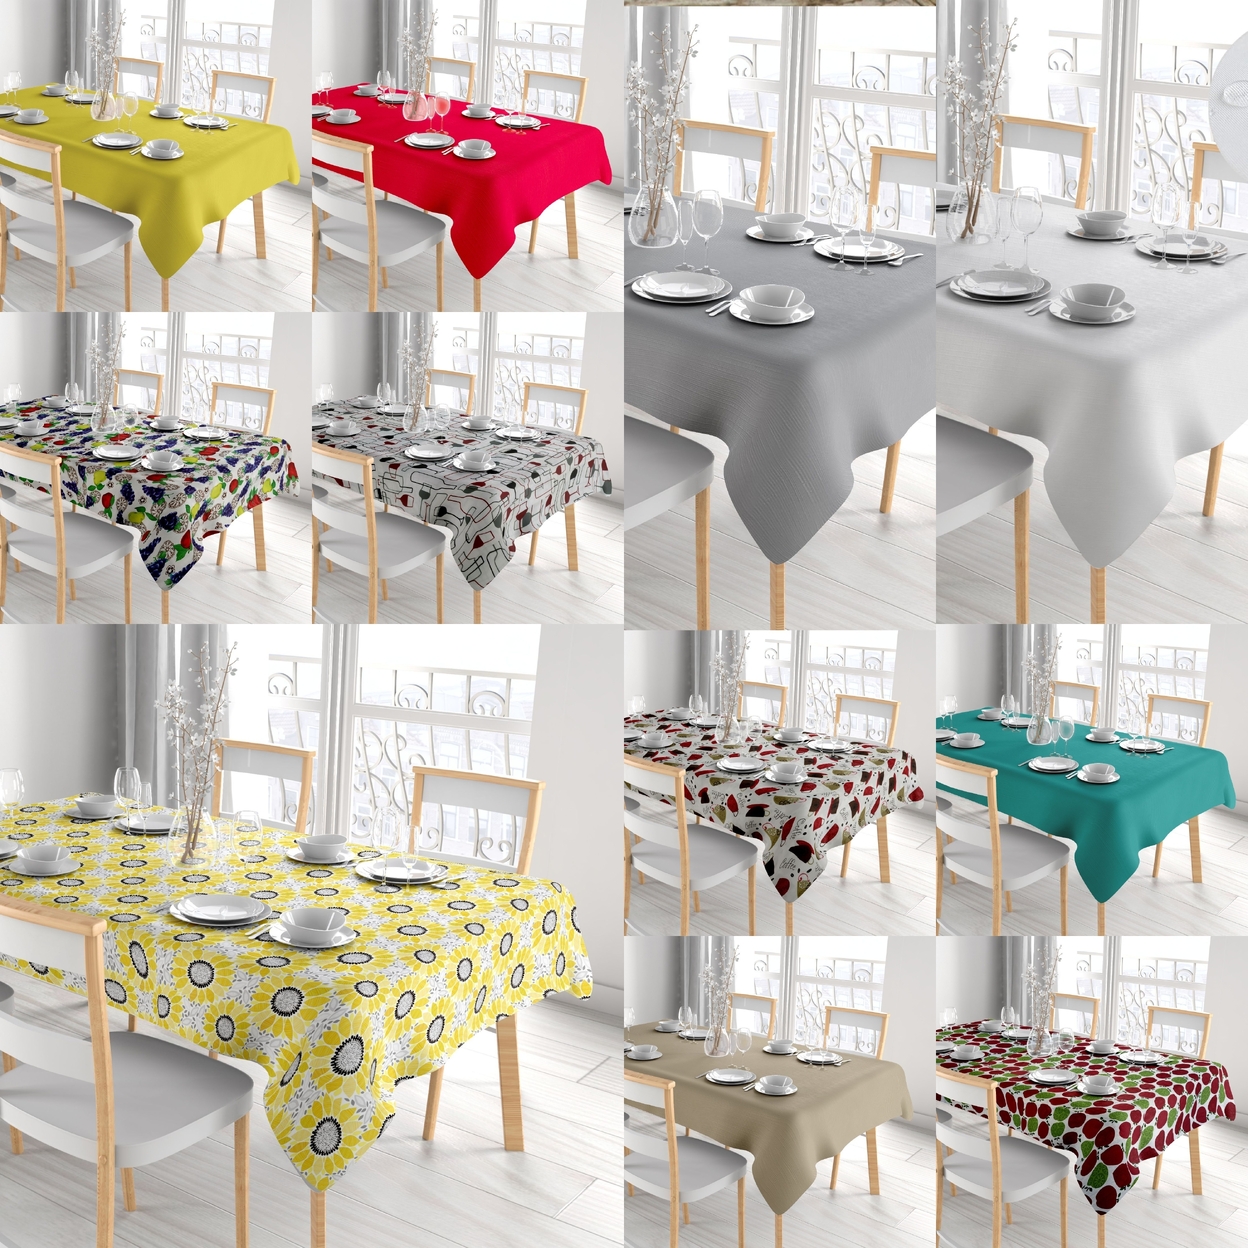 Kitchen Dining Water Resistant Oil Proof Flannel Back PVC Vinyl Tablecloth - 52'' X 52'', Print